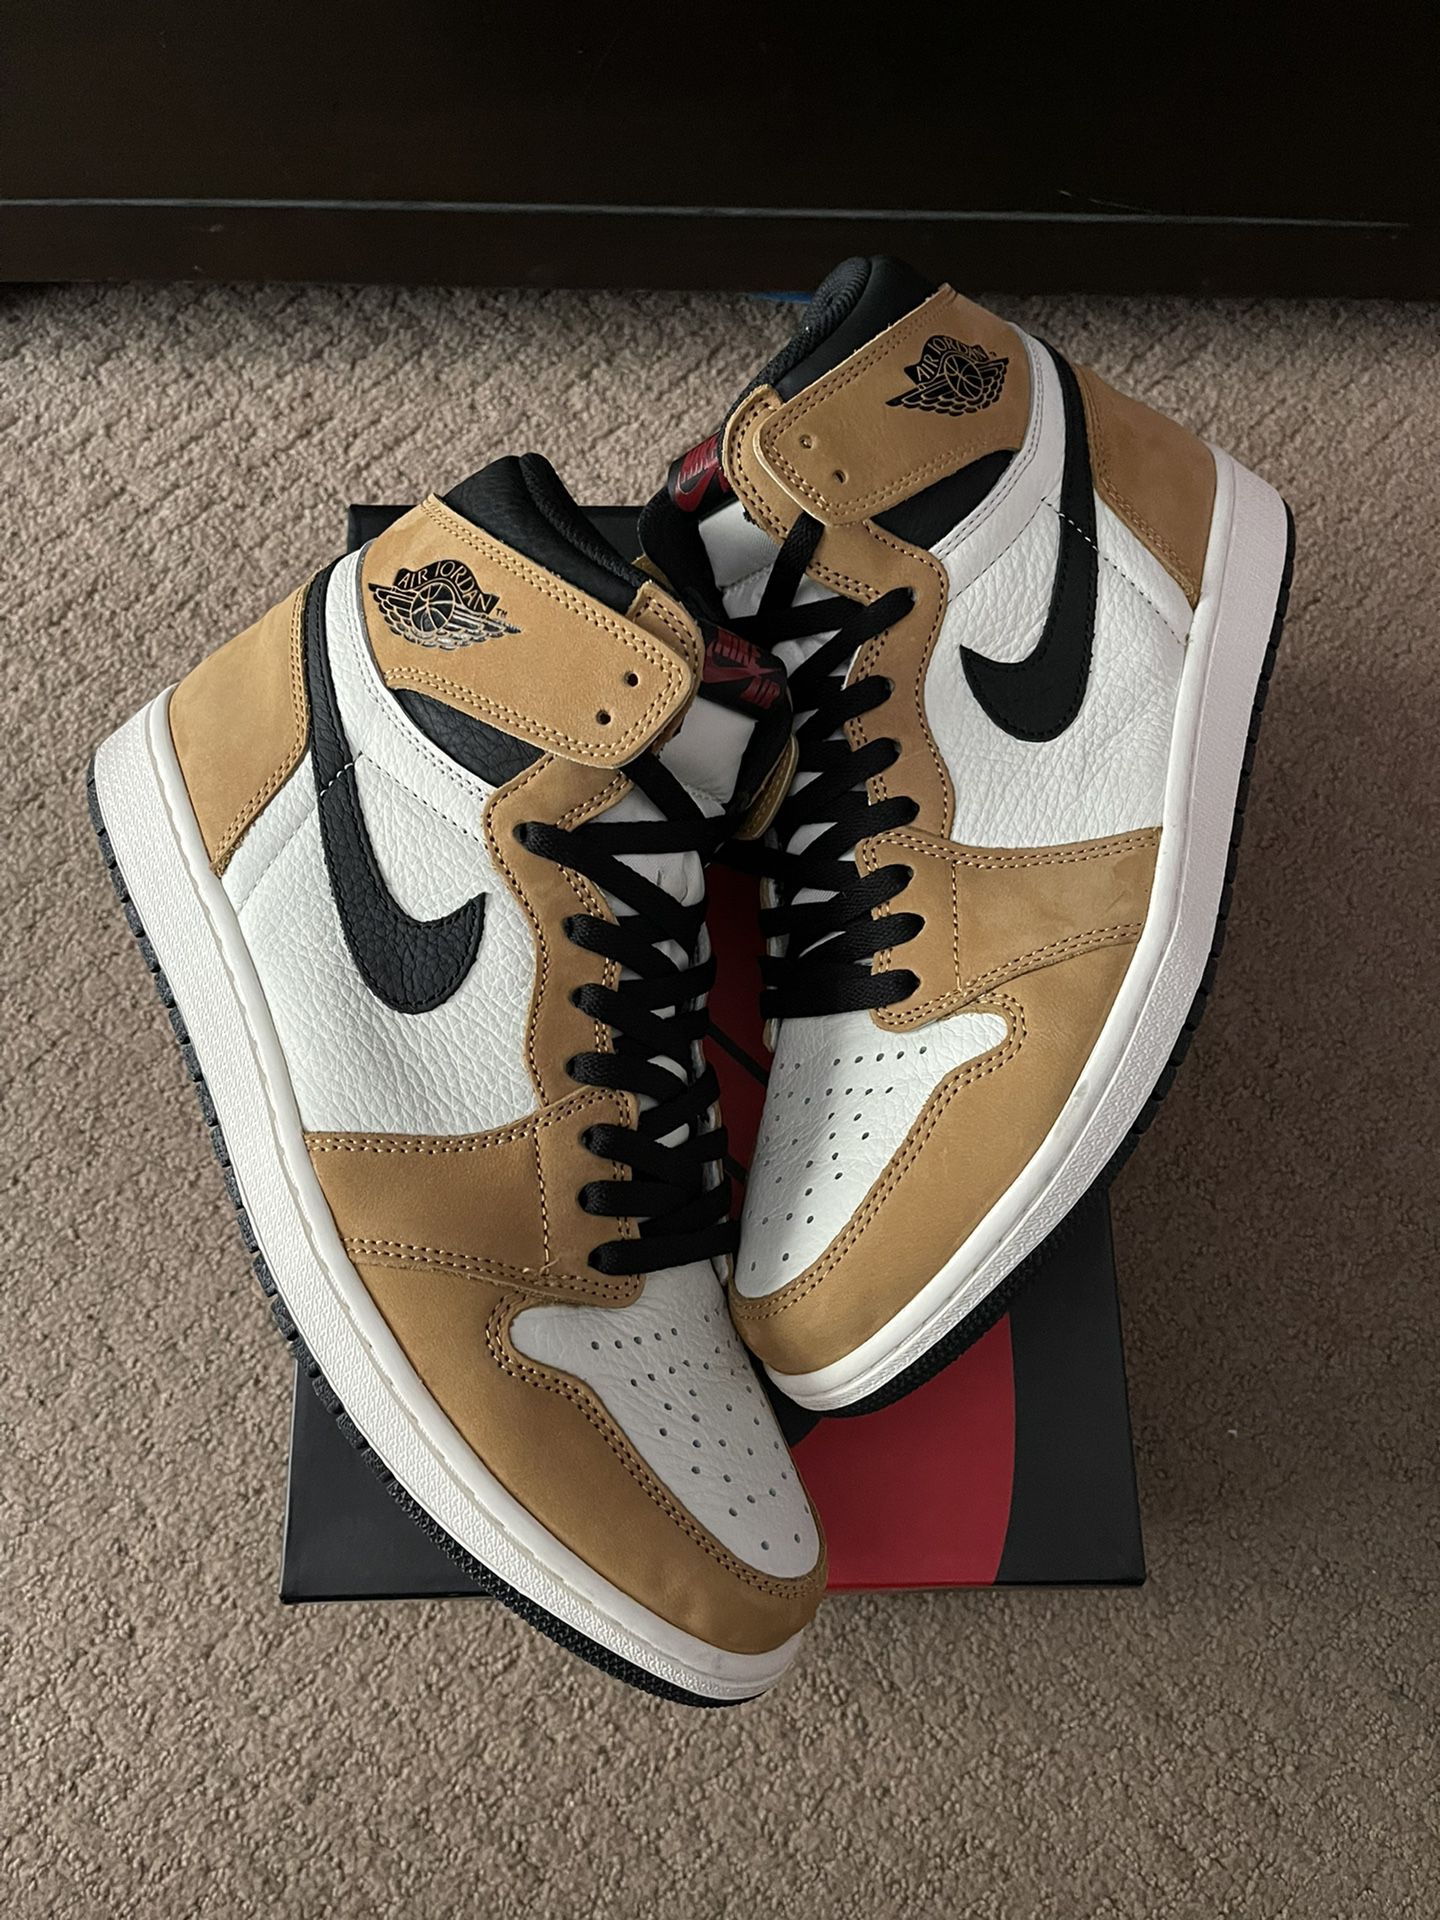 Nike Air Jordan 1 Rookie of the Year size 12 for Sale Thousand Oaks, OfferUp